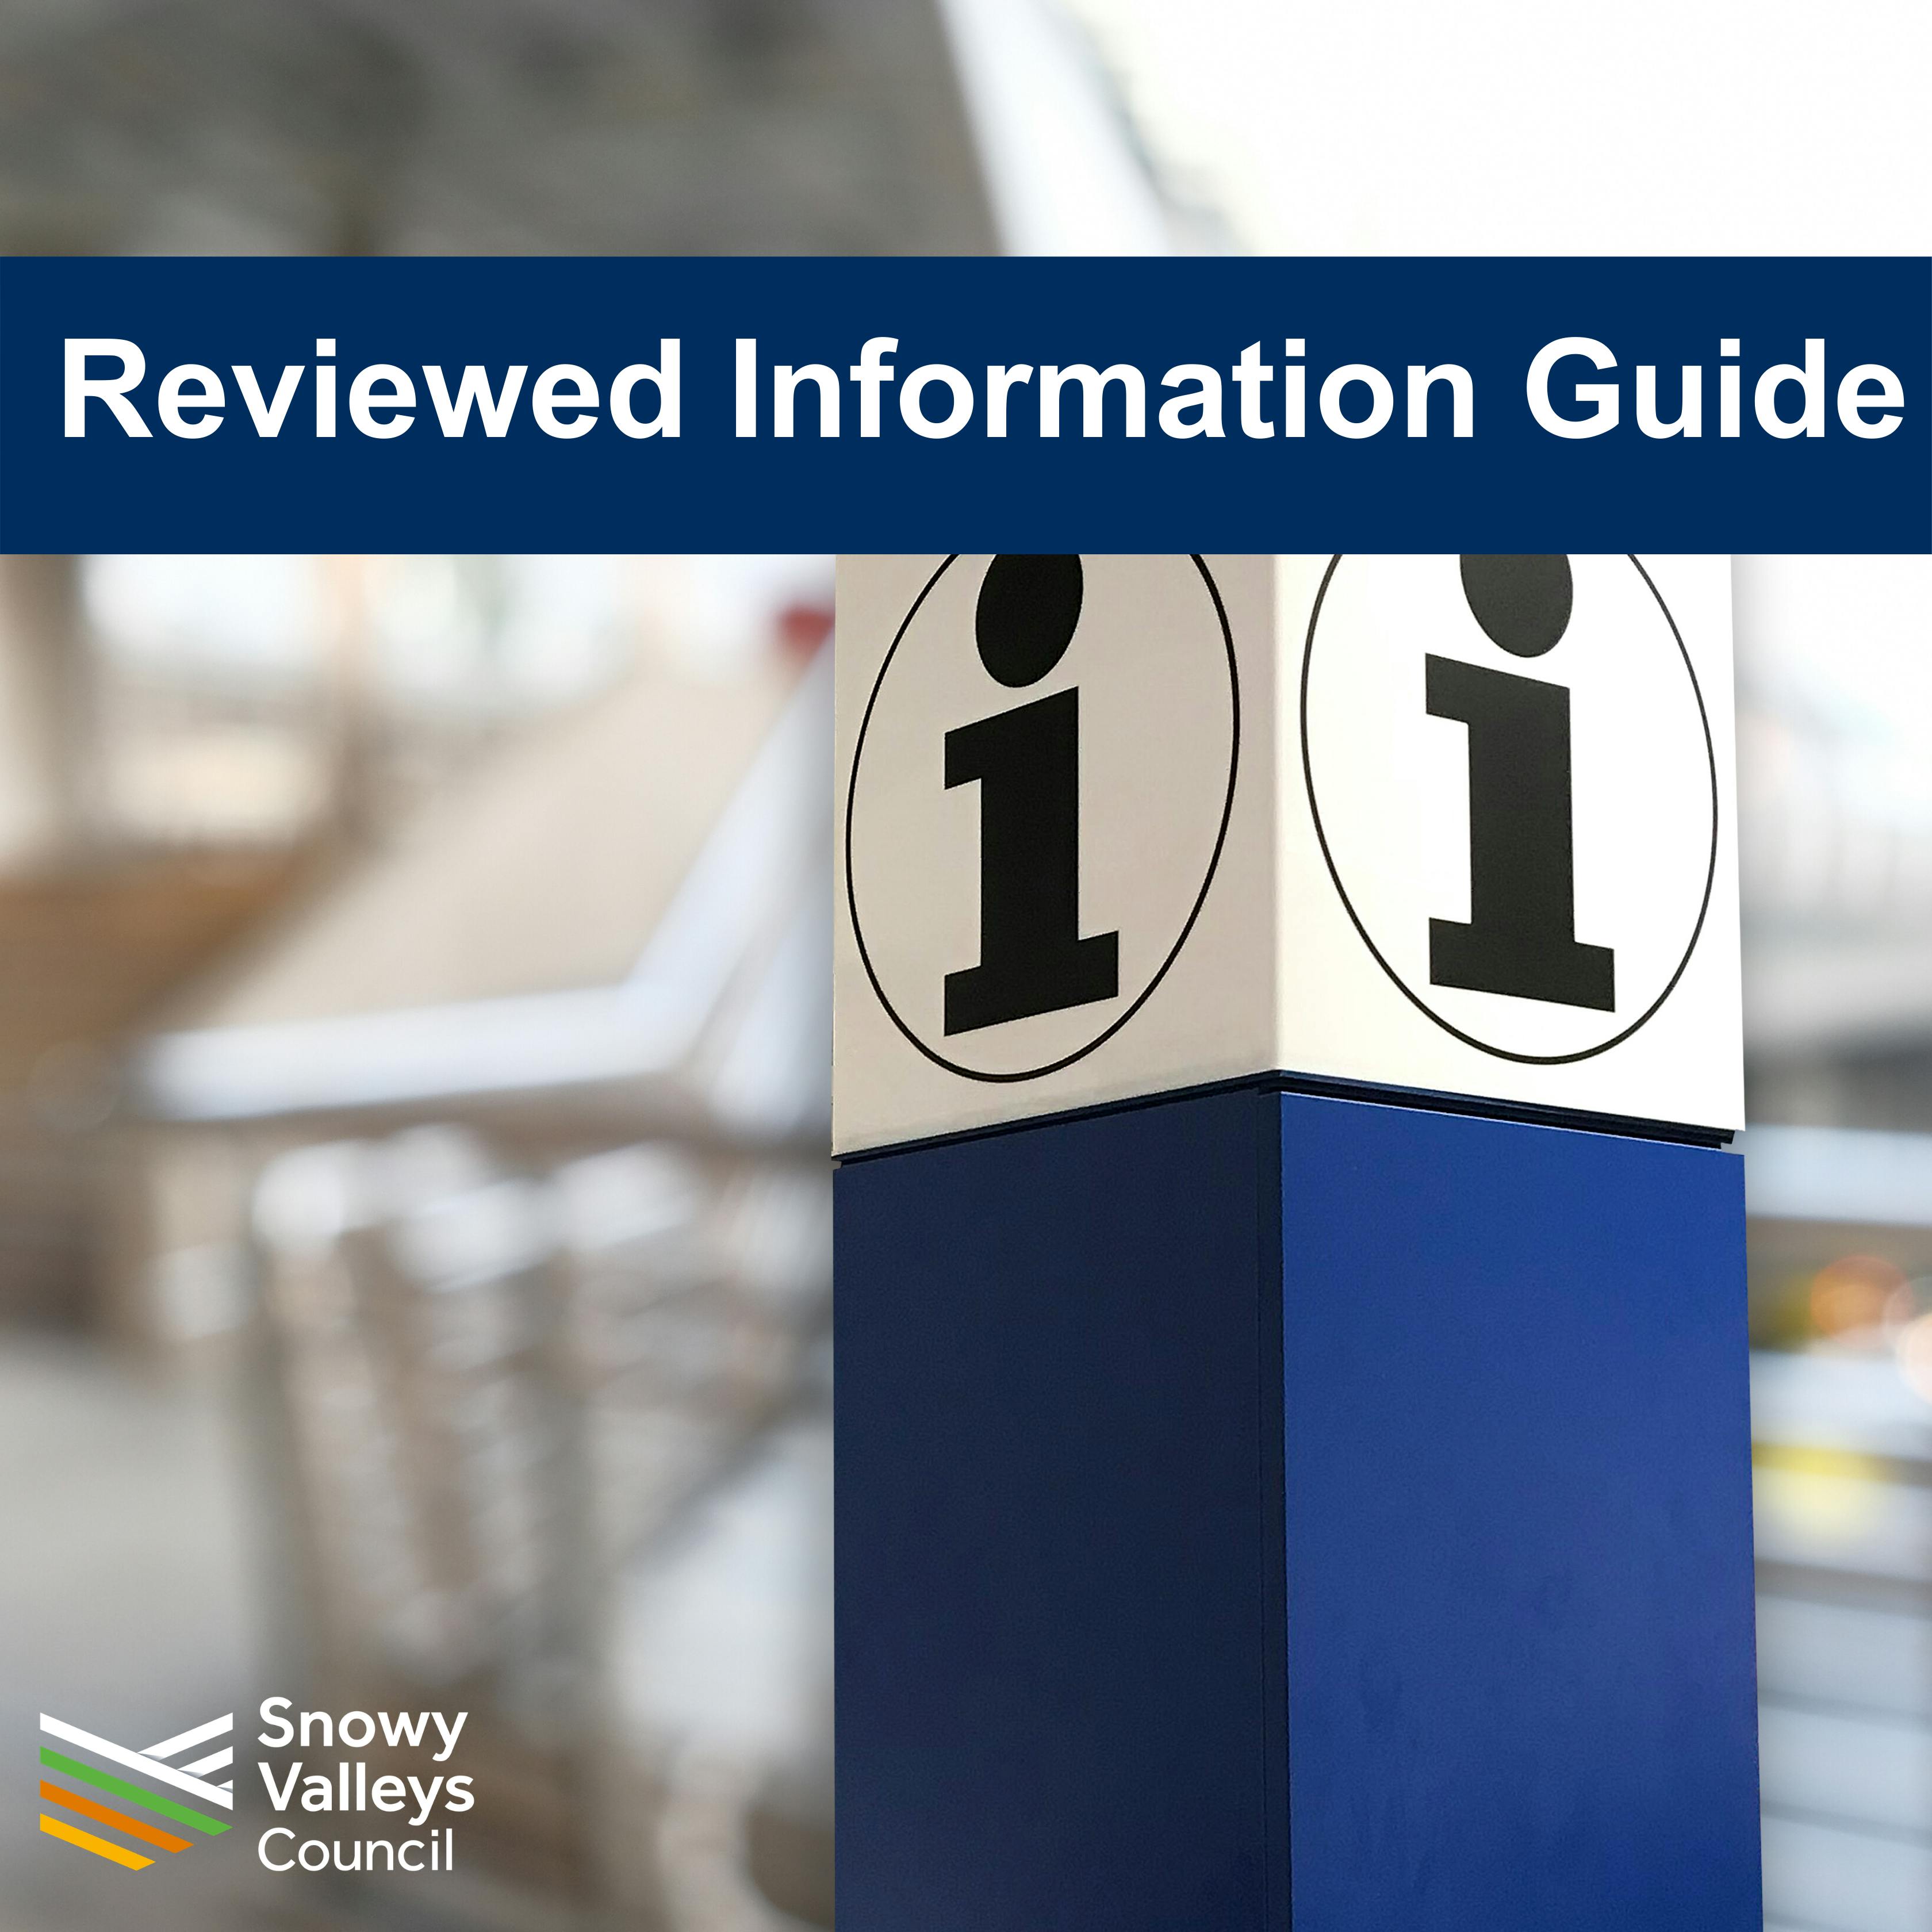 Reviewed Information Guide